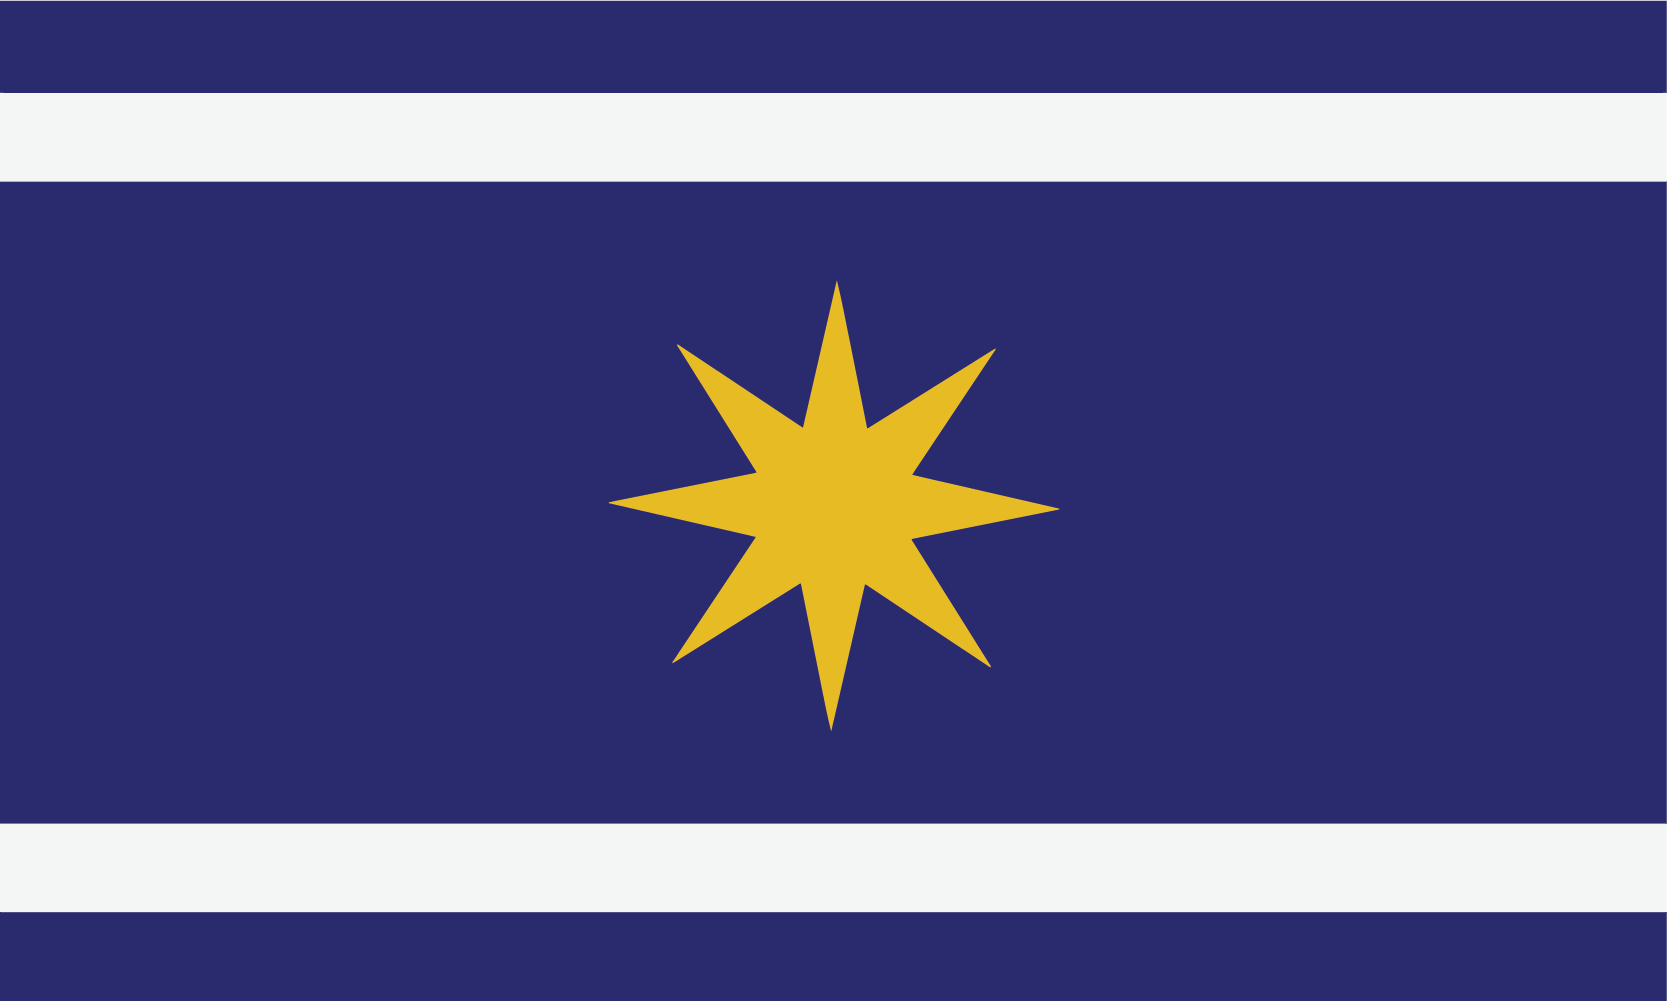 A design proposal for a new state flag for Minnesota: a symmetrical, rectangular, navy blue field containing a gold, eight-pointed star and white horizontals near the top and bottom.